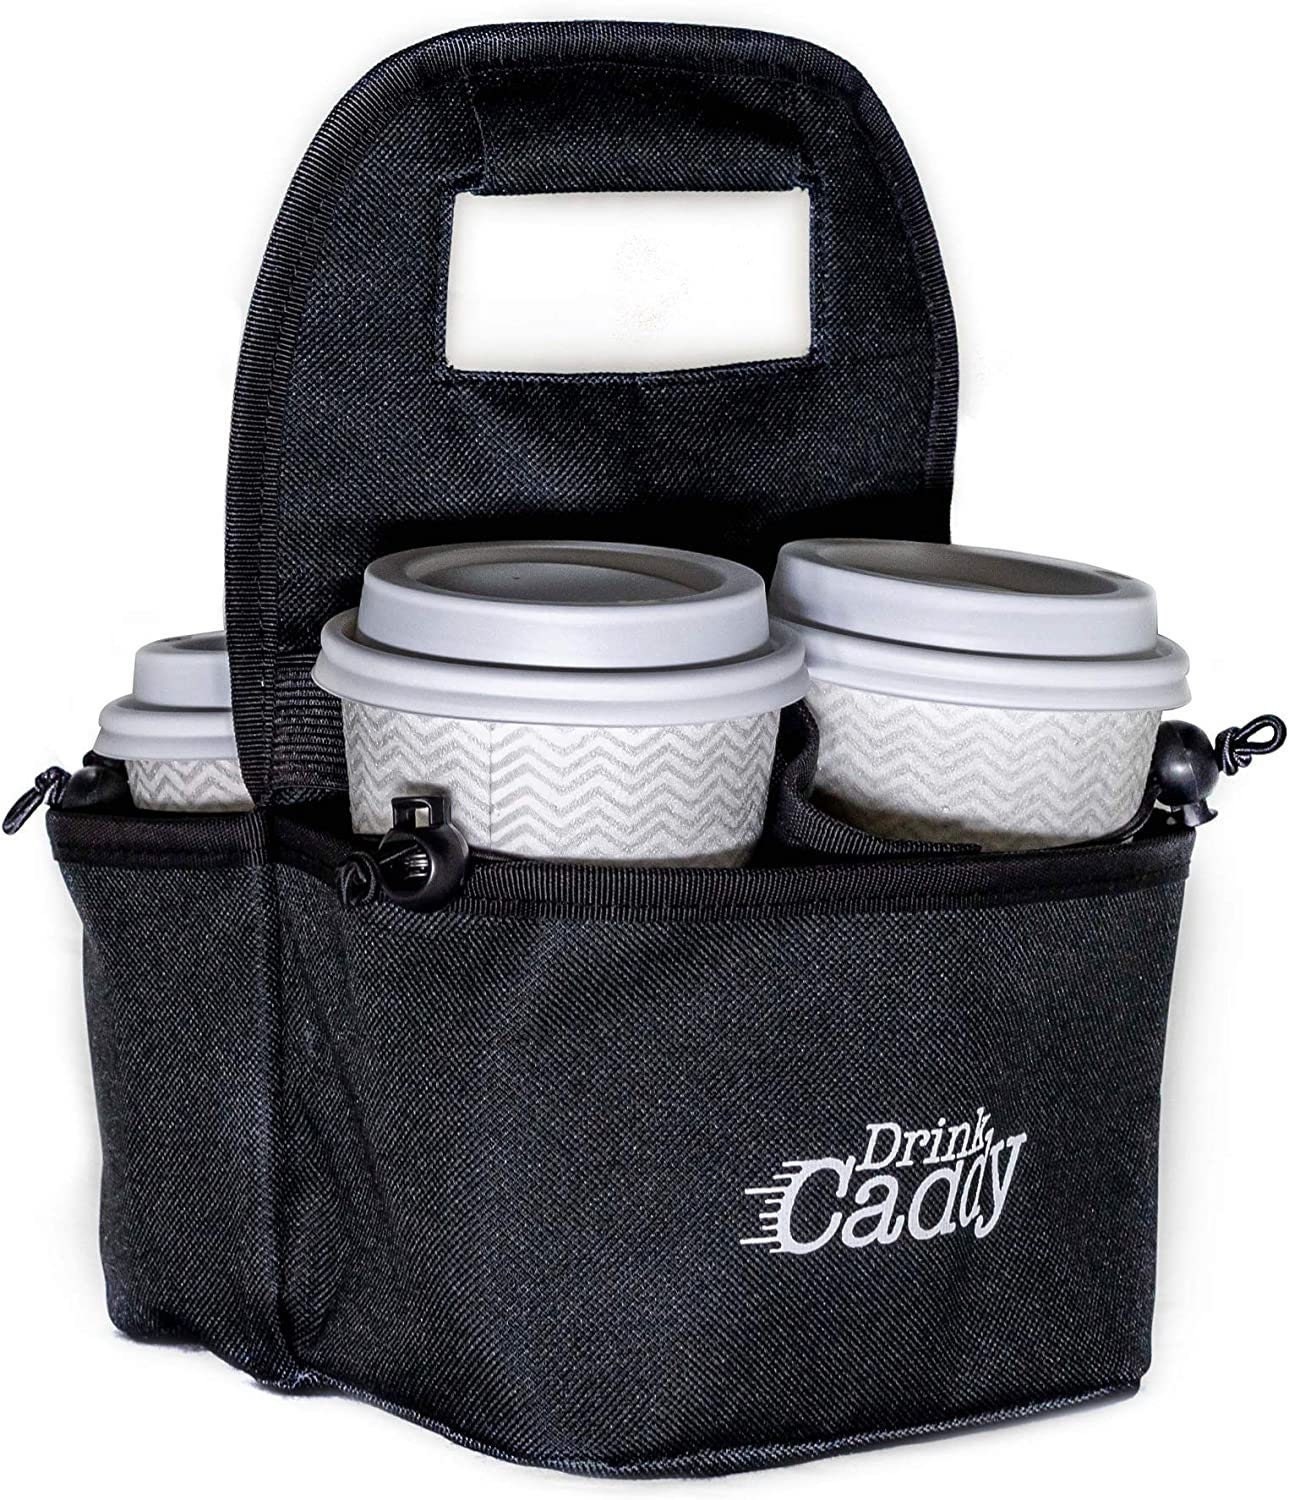 Drink Caddy Portable Drink Carrier and Reusable Coffee Cup Holder - 4 Cup Collapsible Tote Bag with Organizer Pockets Safely secures Hot and Cold